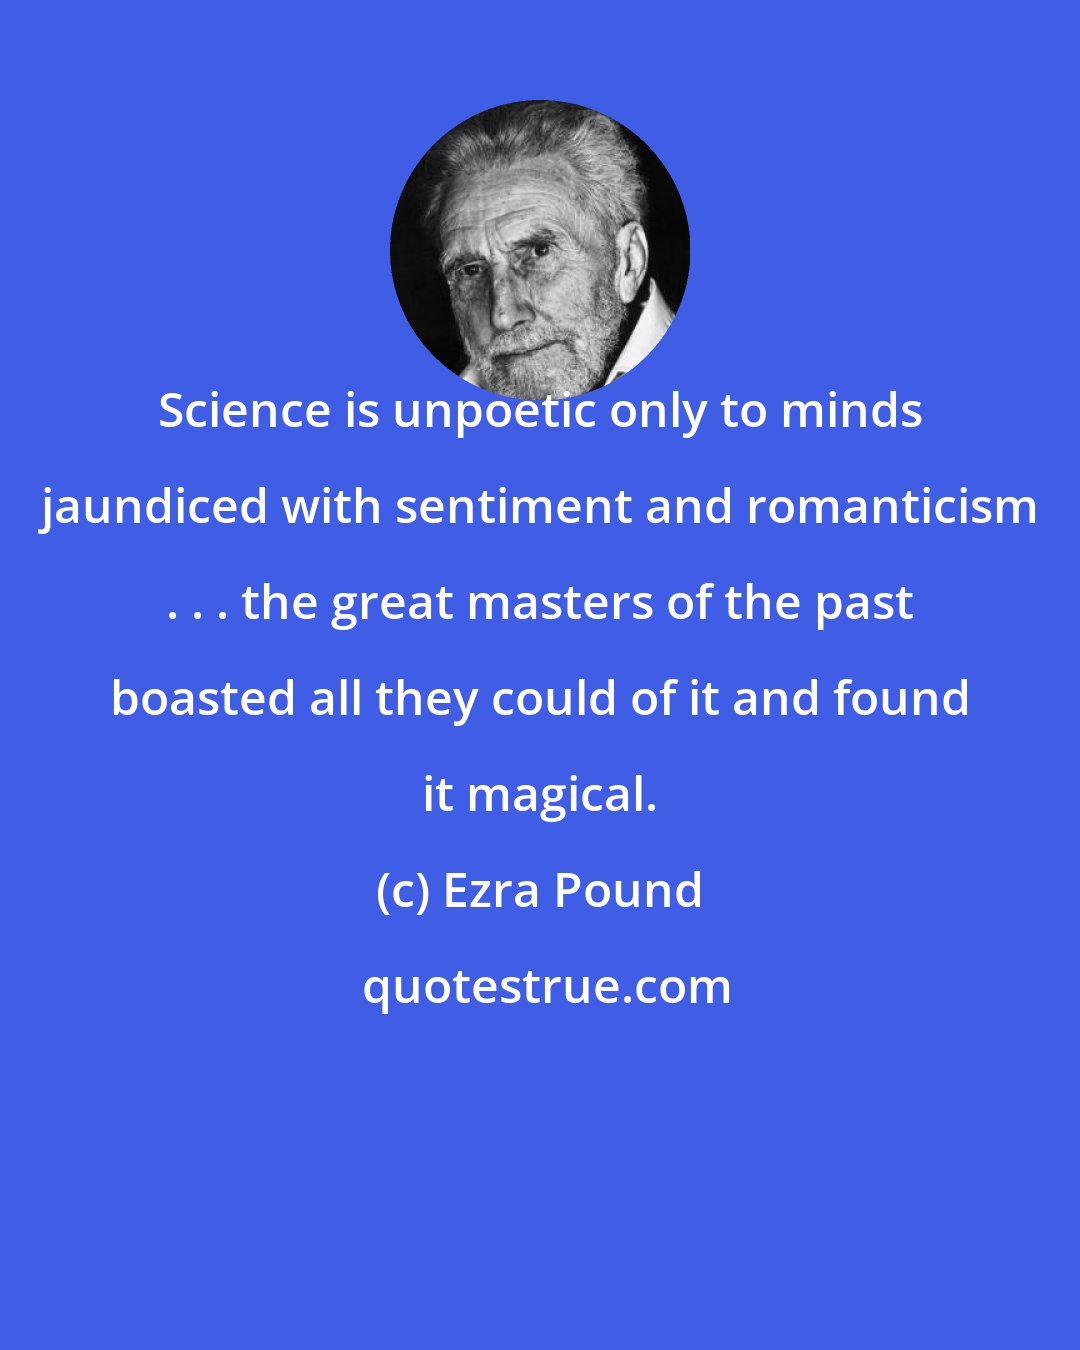 Ezra Pound: Science is unpoetic only to minds jaundiced with sentiment and romanticism . . . the great masters of the past boasted all they could of it and found it magical.